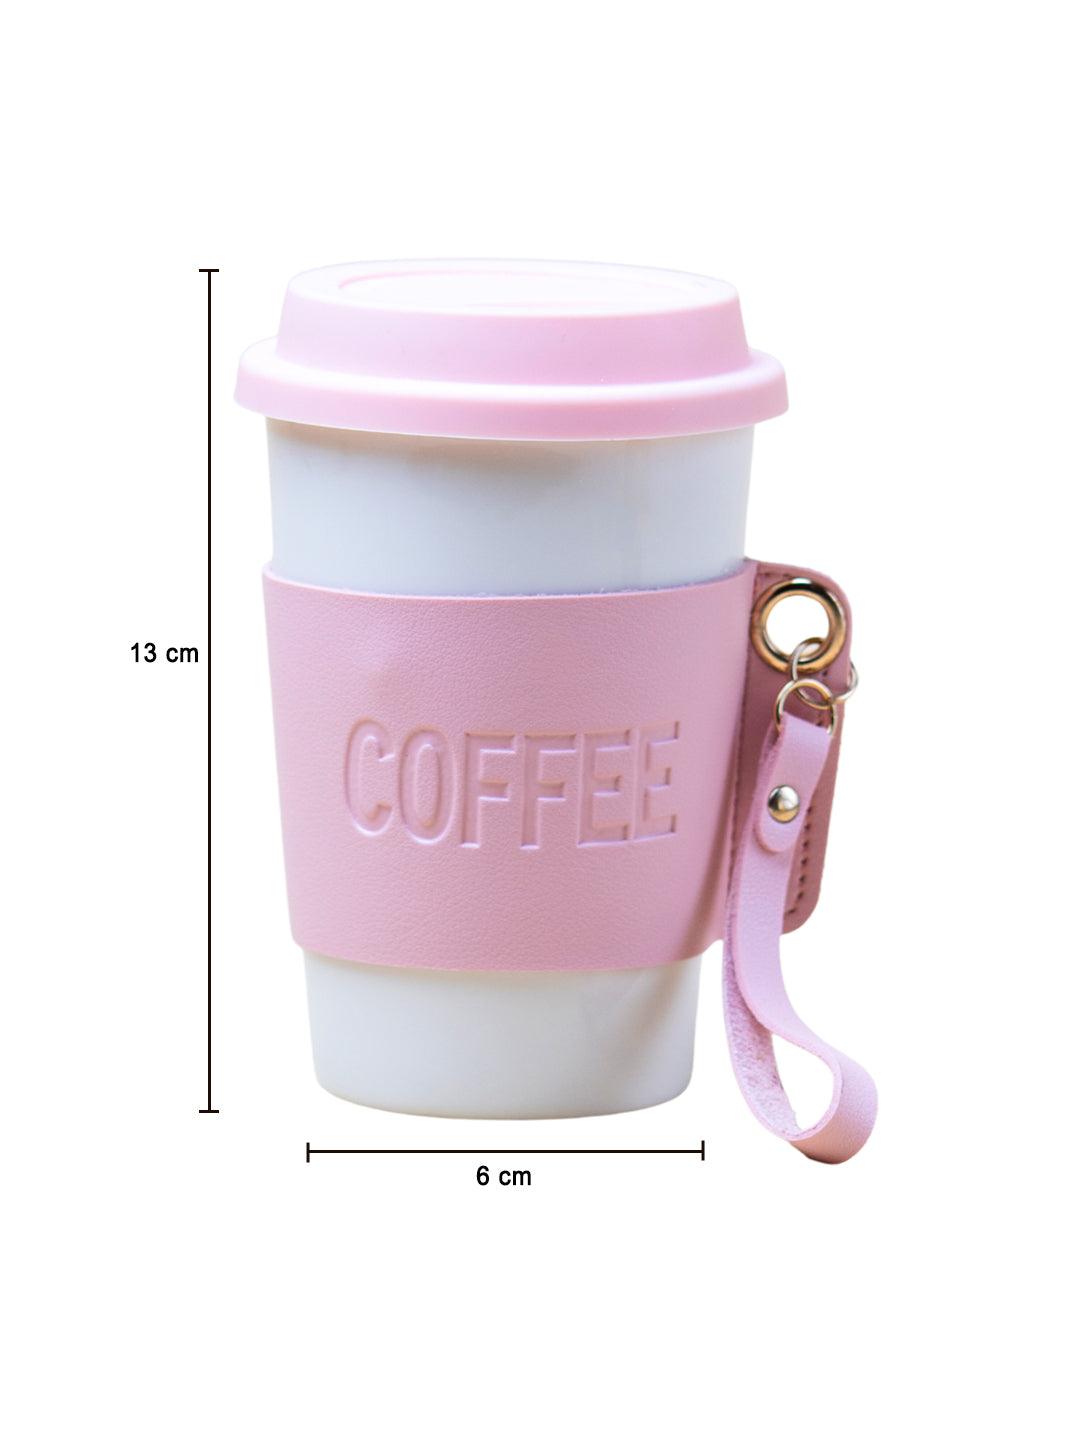 Pink Ceramic Sipper - Leather Grip, 350 Ml - 4